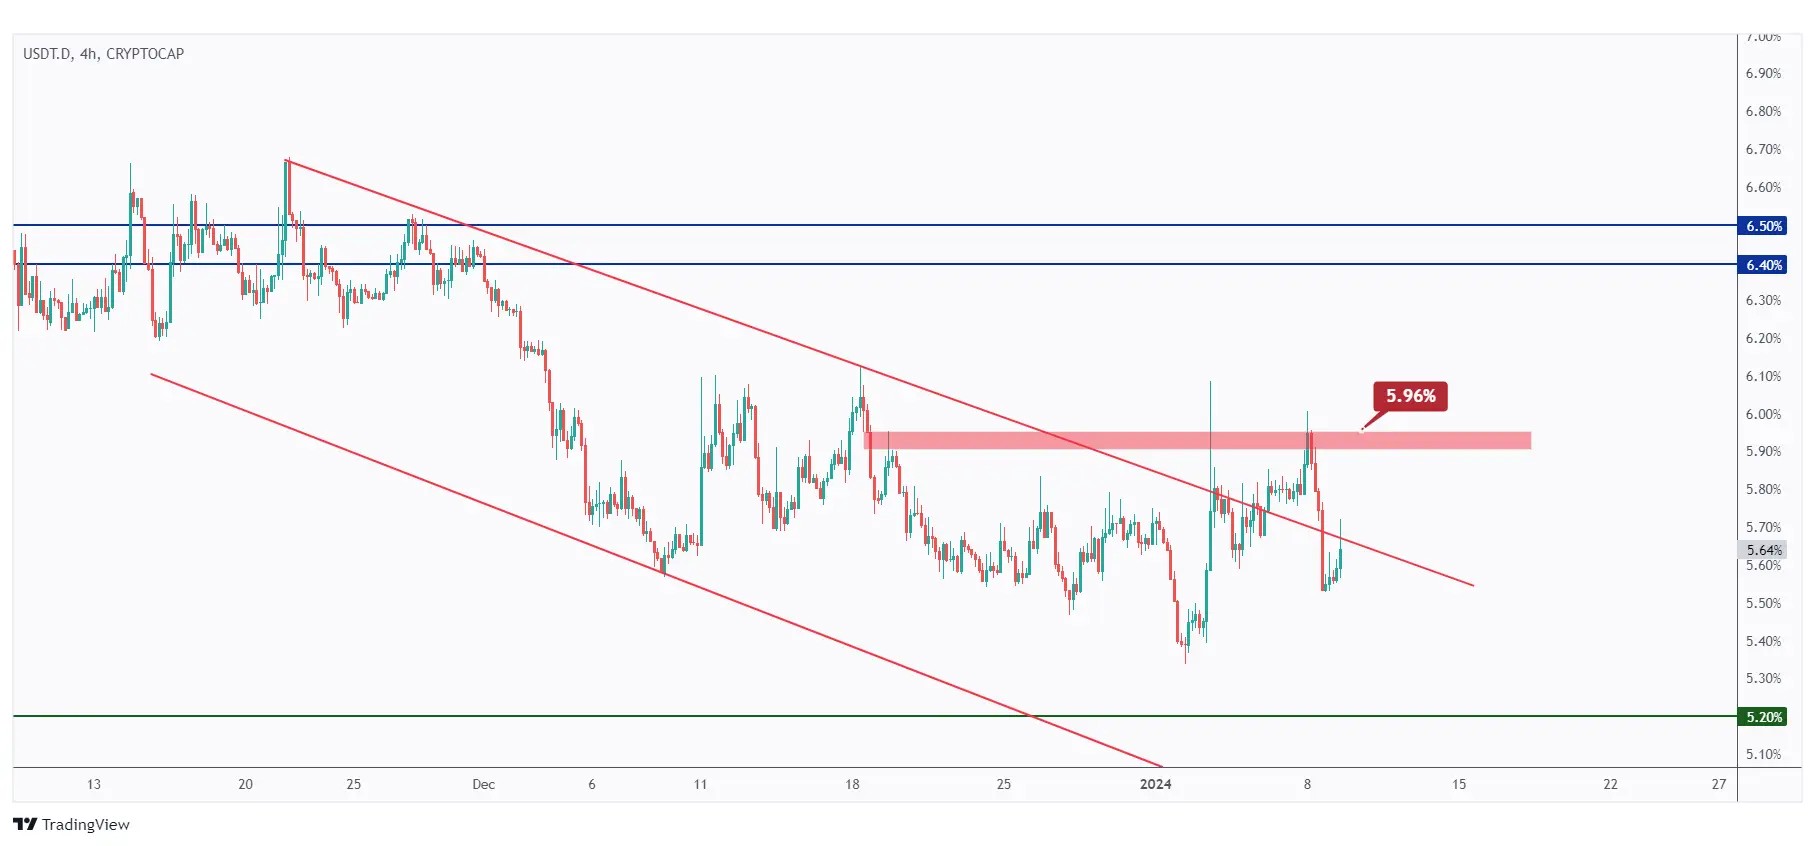 USDT dominance 4h chart showing the overall bearish trend inside a falling channel.